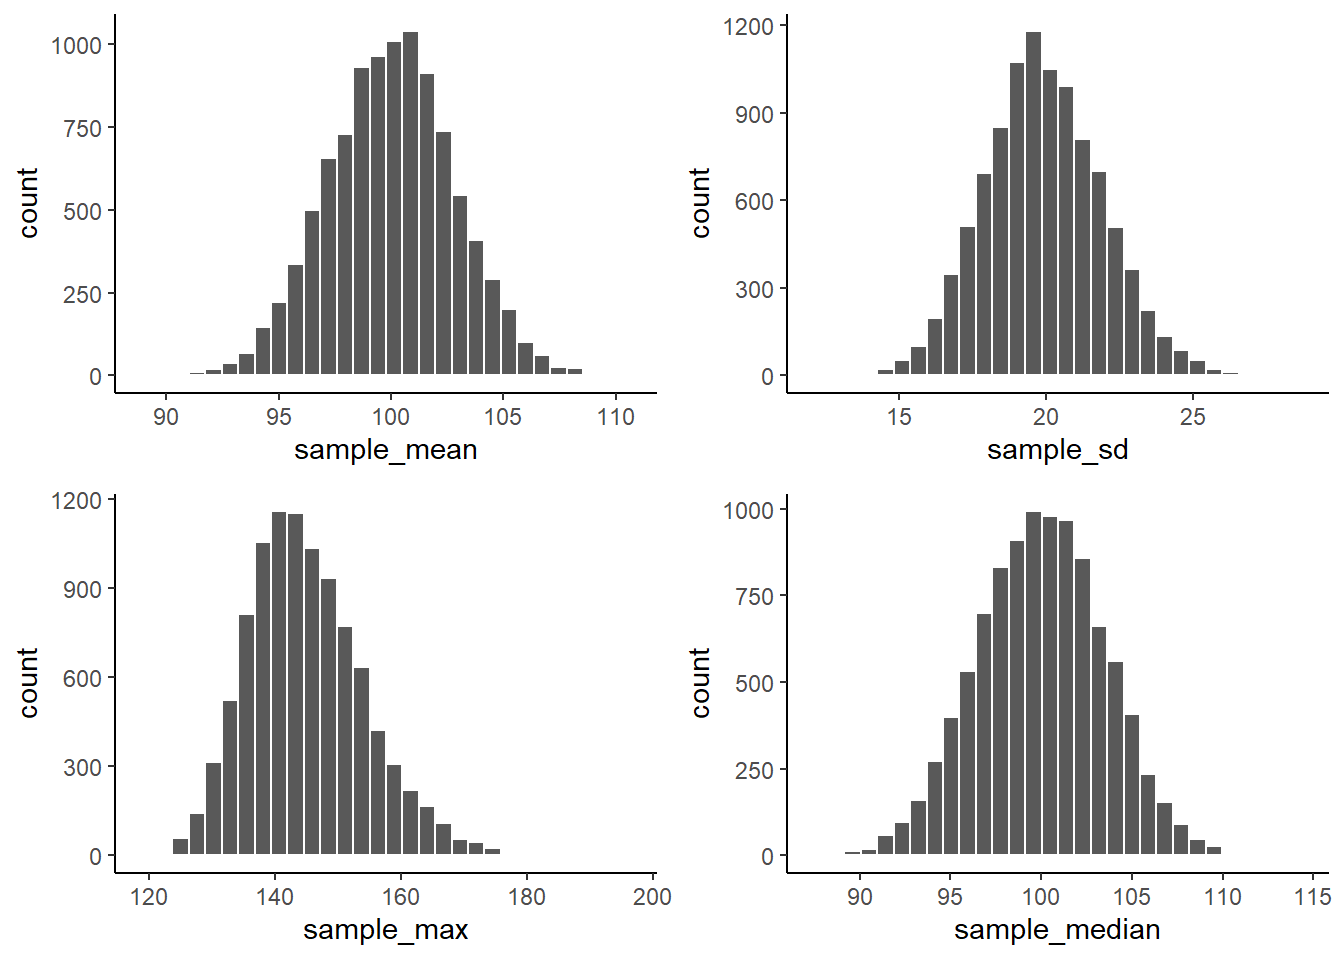 Each panel shows a histogram of a different sampling statistic